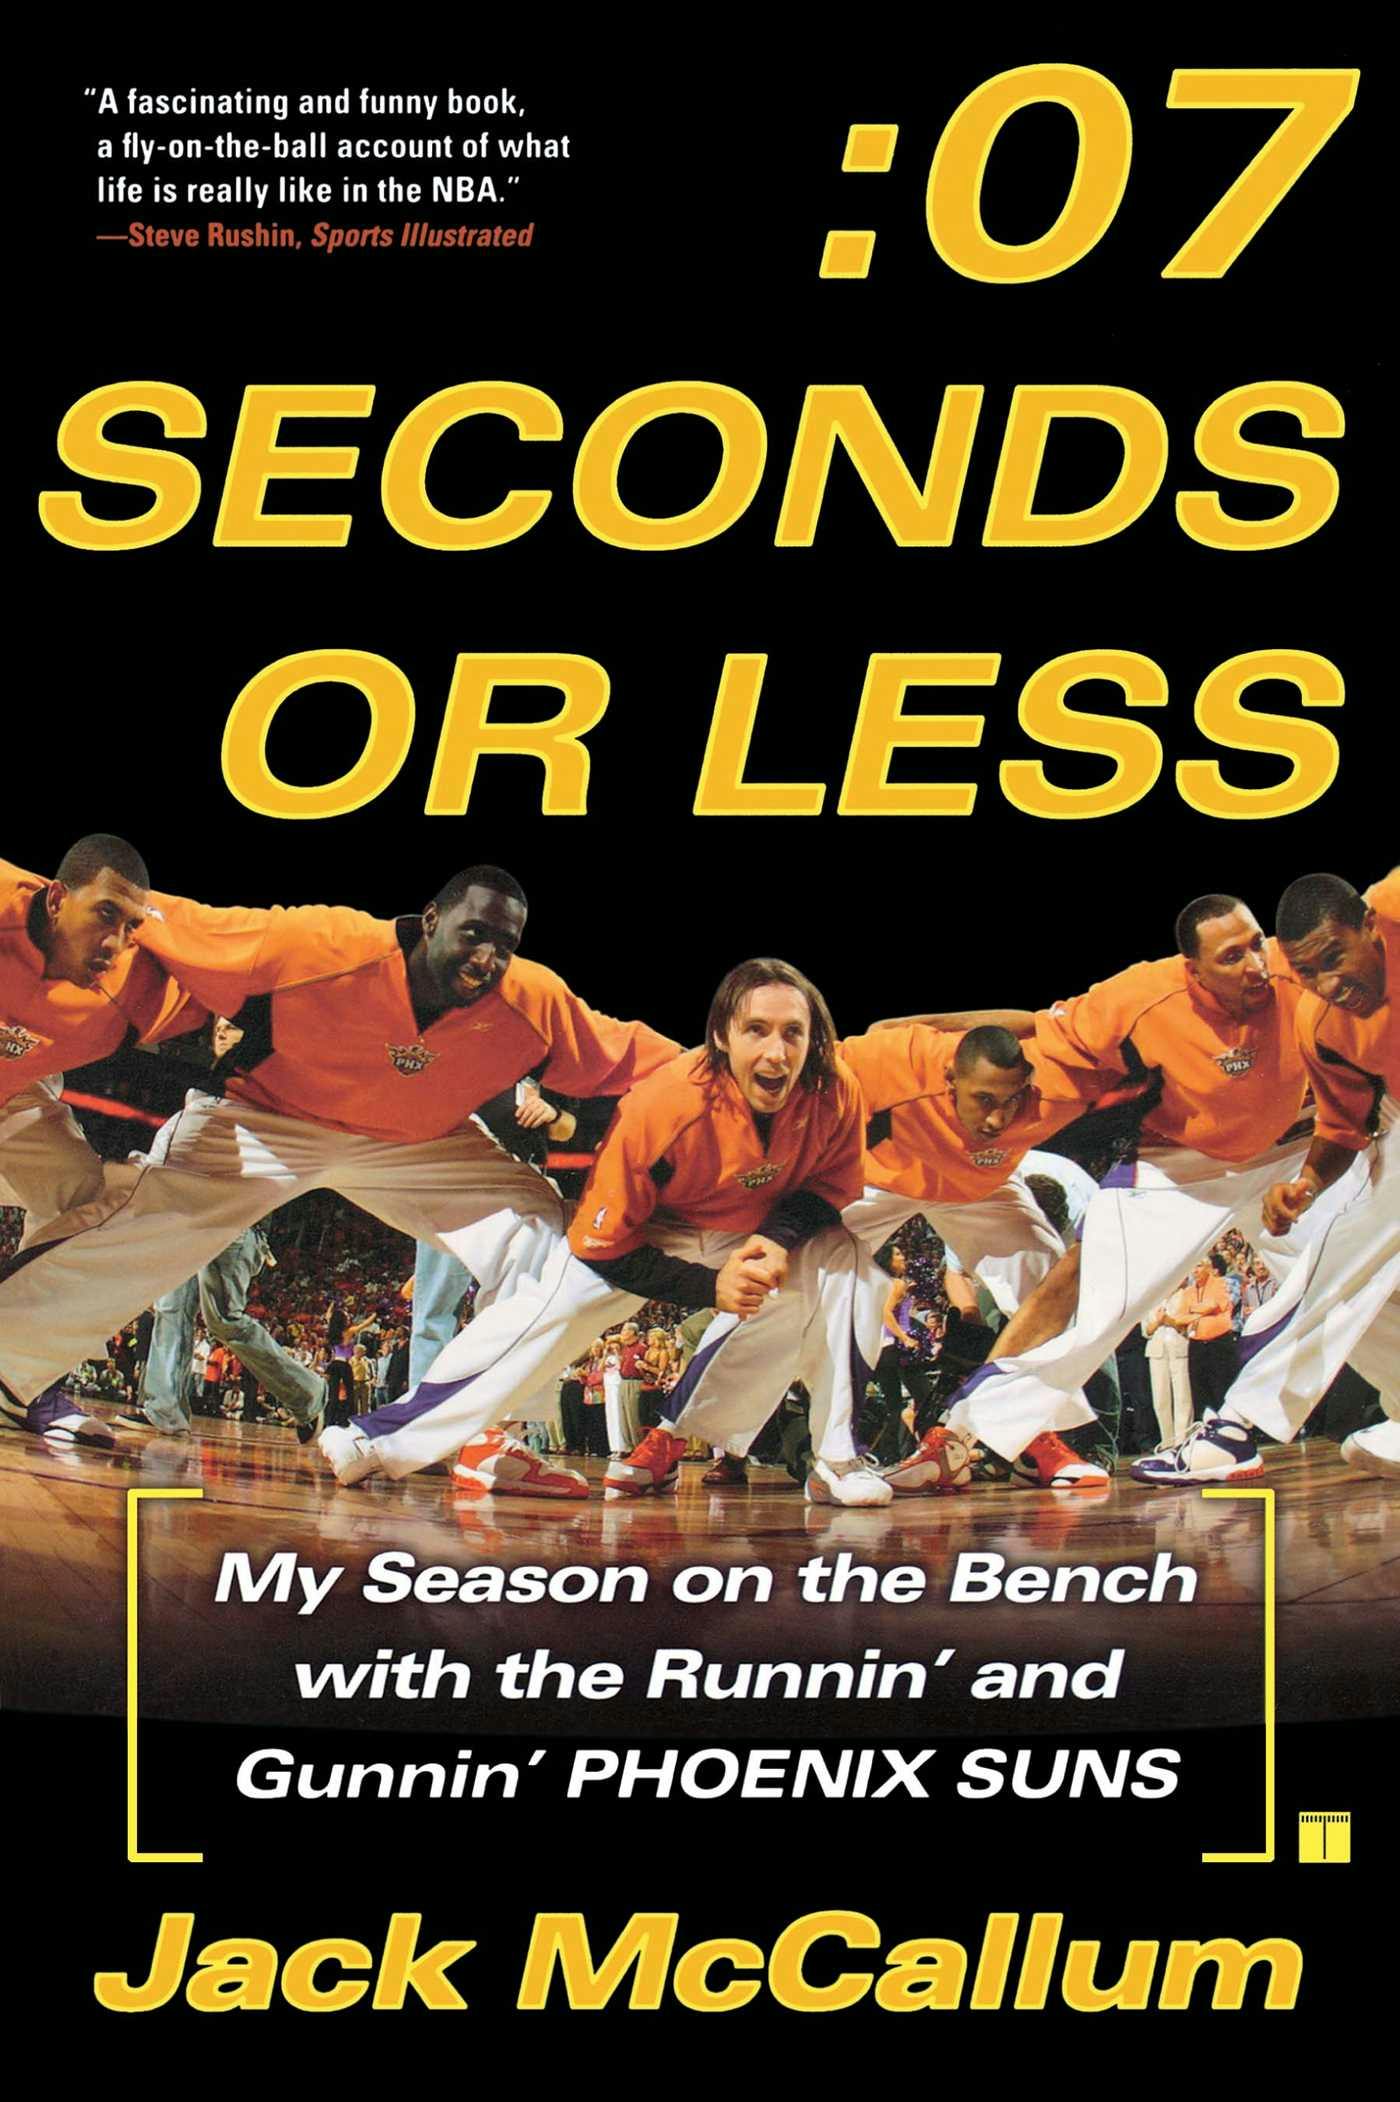 Seven Seconds or Less: My Season on the Bench with the Runnin' and Gunnin' Phoenix Suns - Jack McCallum